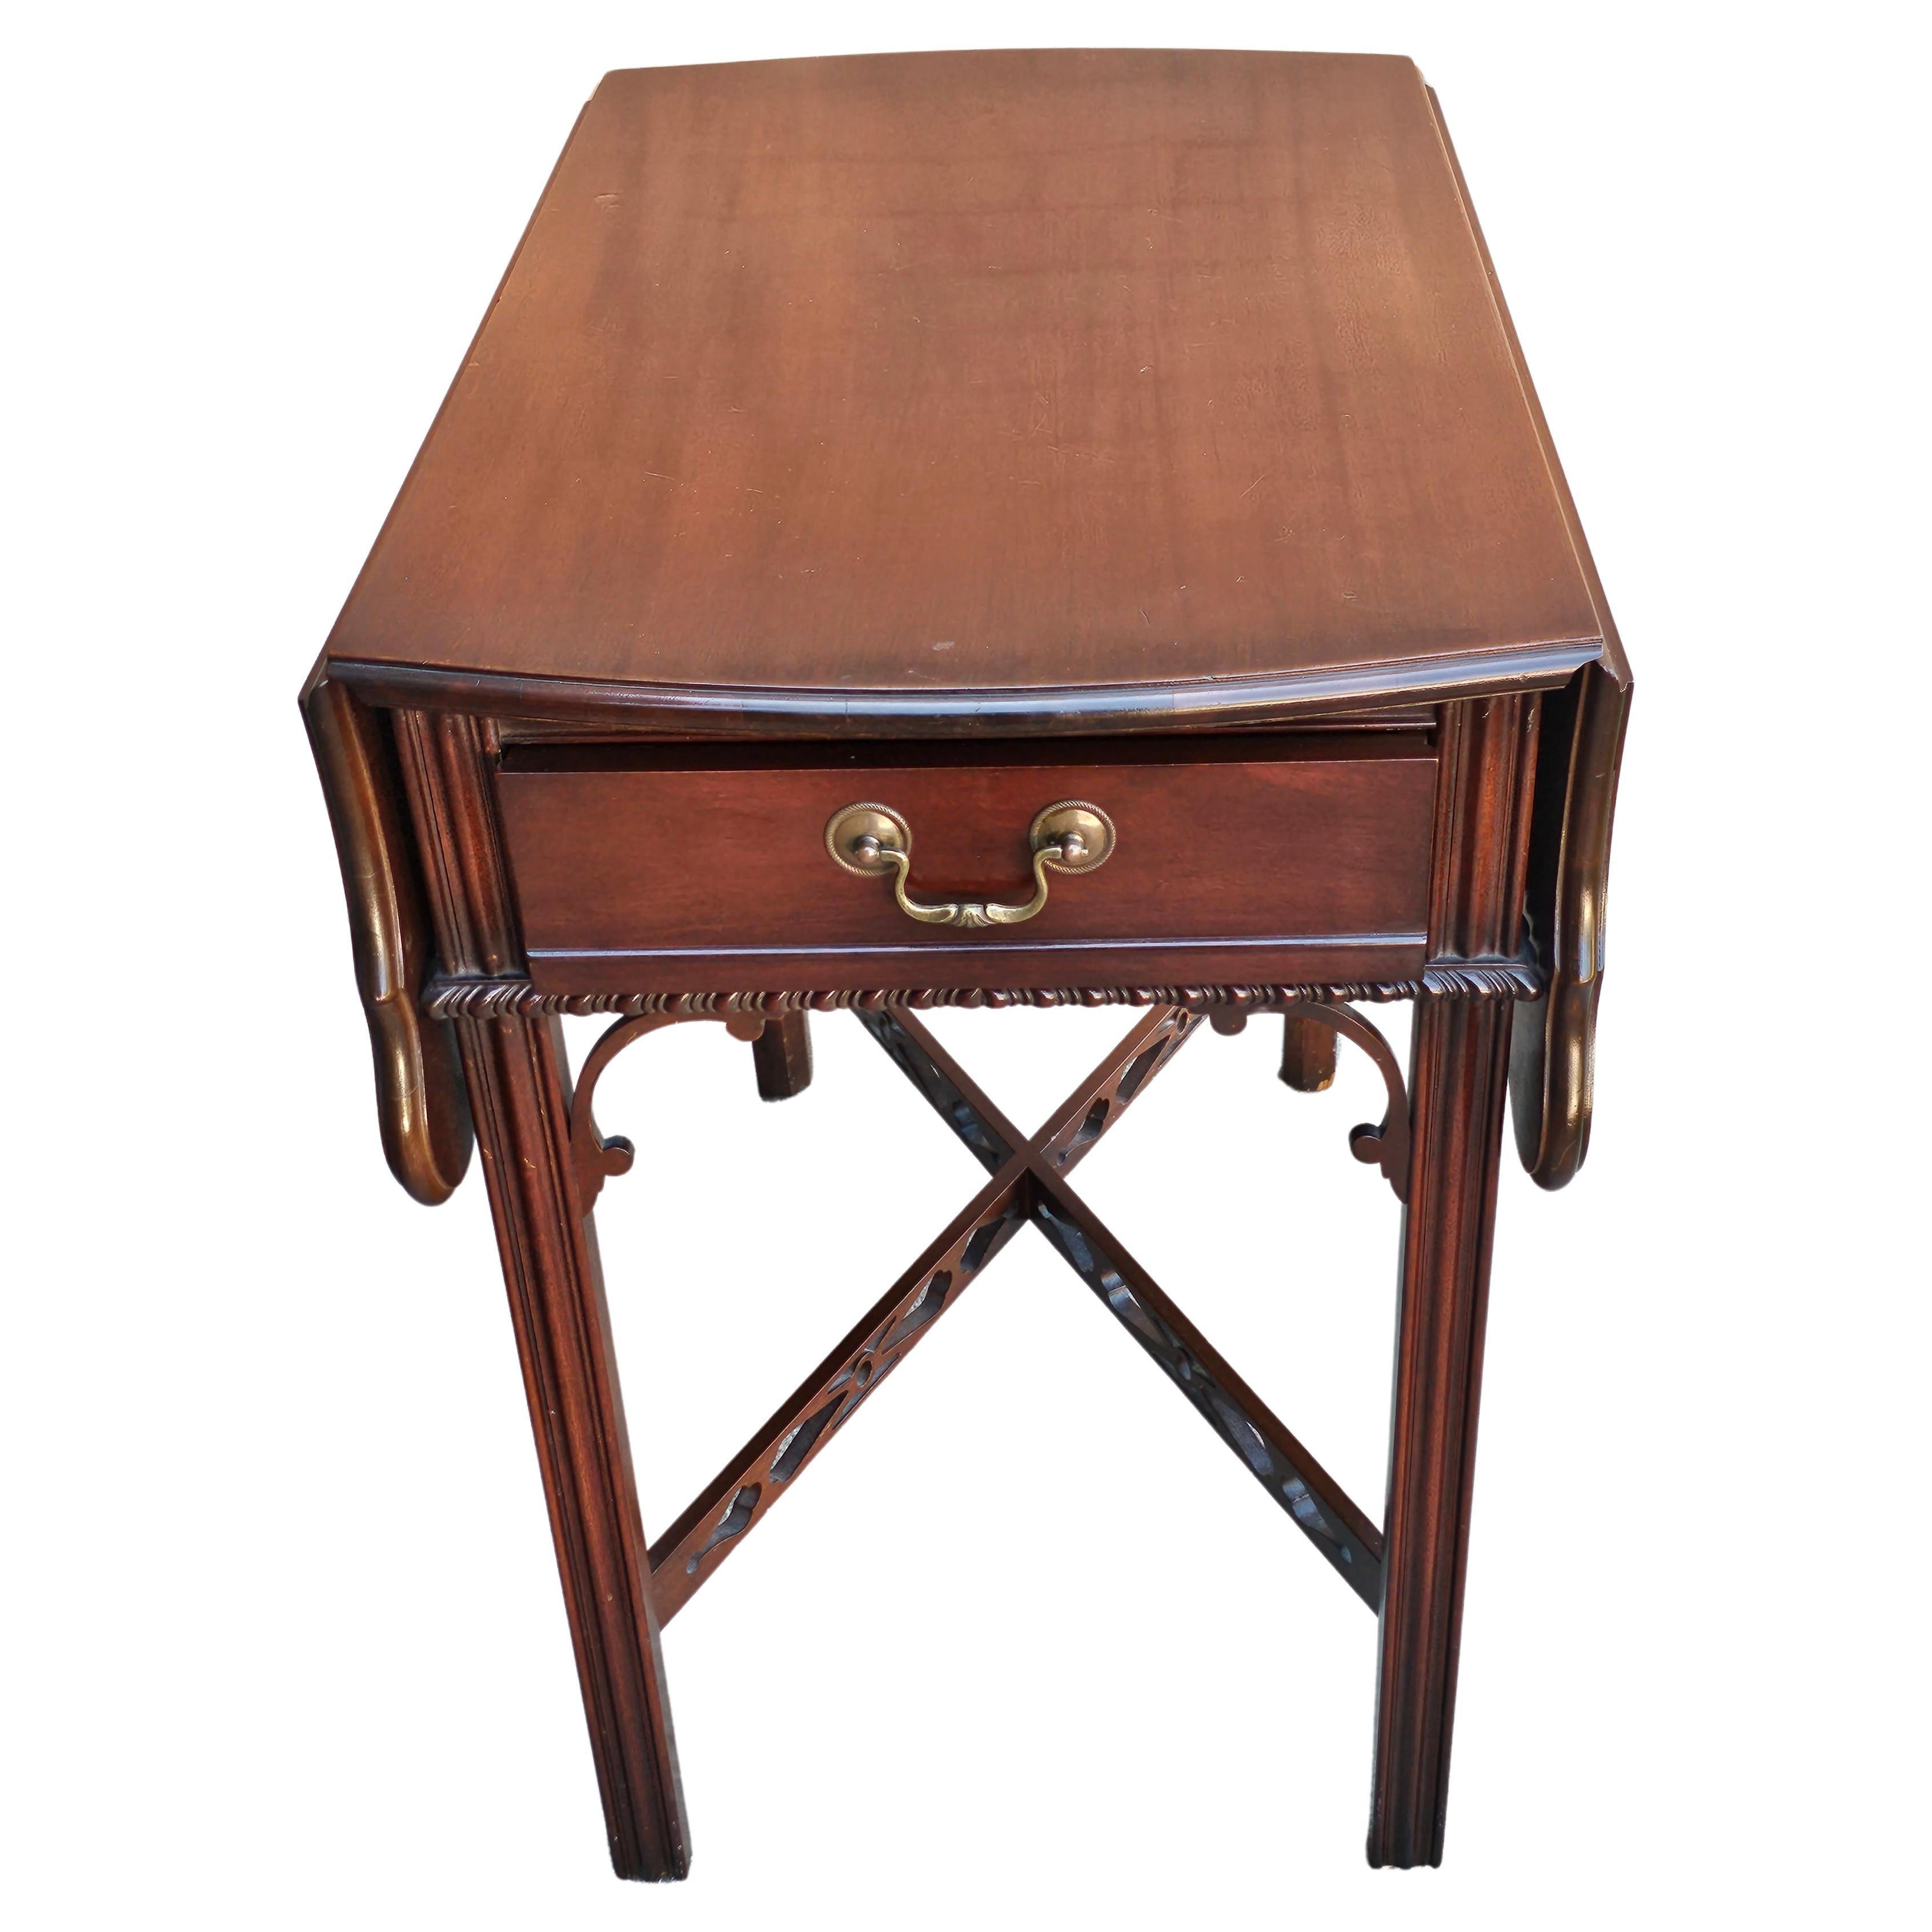 A rare early 20th century Kreimer and Brother Furniture Co Mahogany Pembroke table with fretworked cross stretcher in good antique. Designed by Imperial Furniture. Table appears to have been refinished not long ago. Measures 37